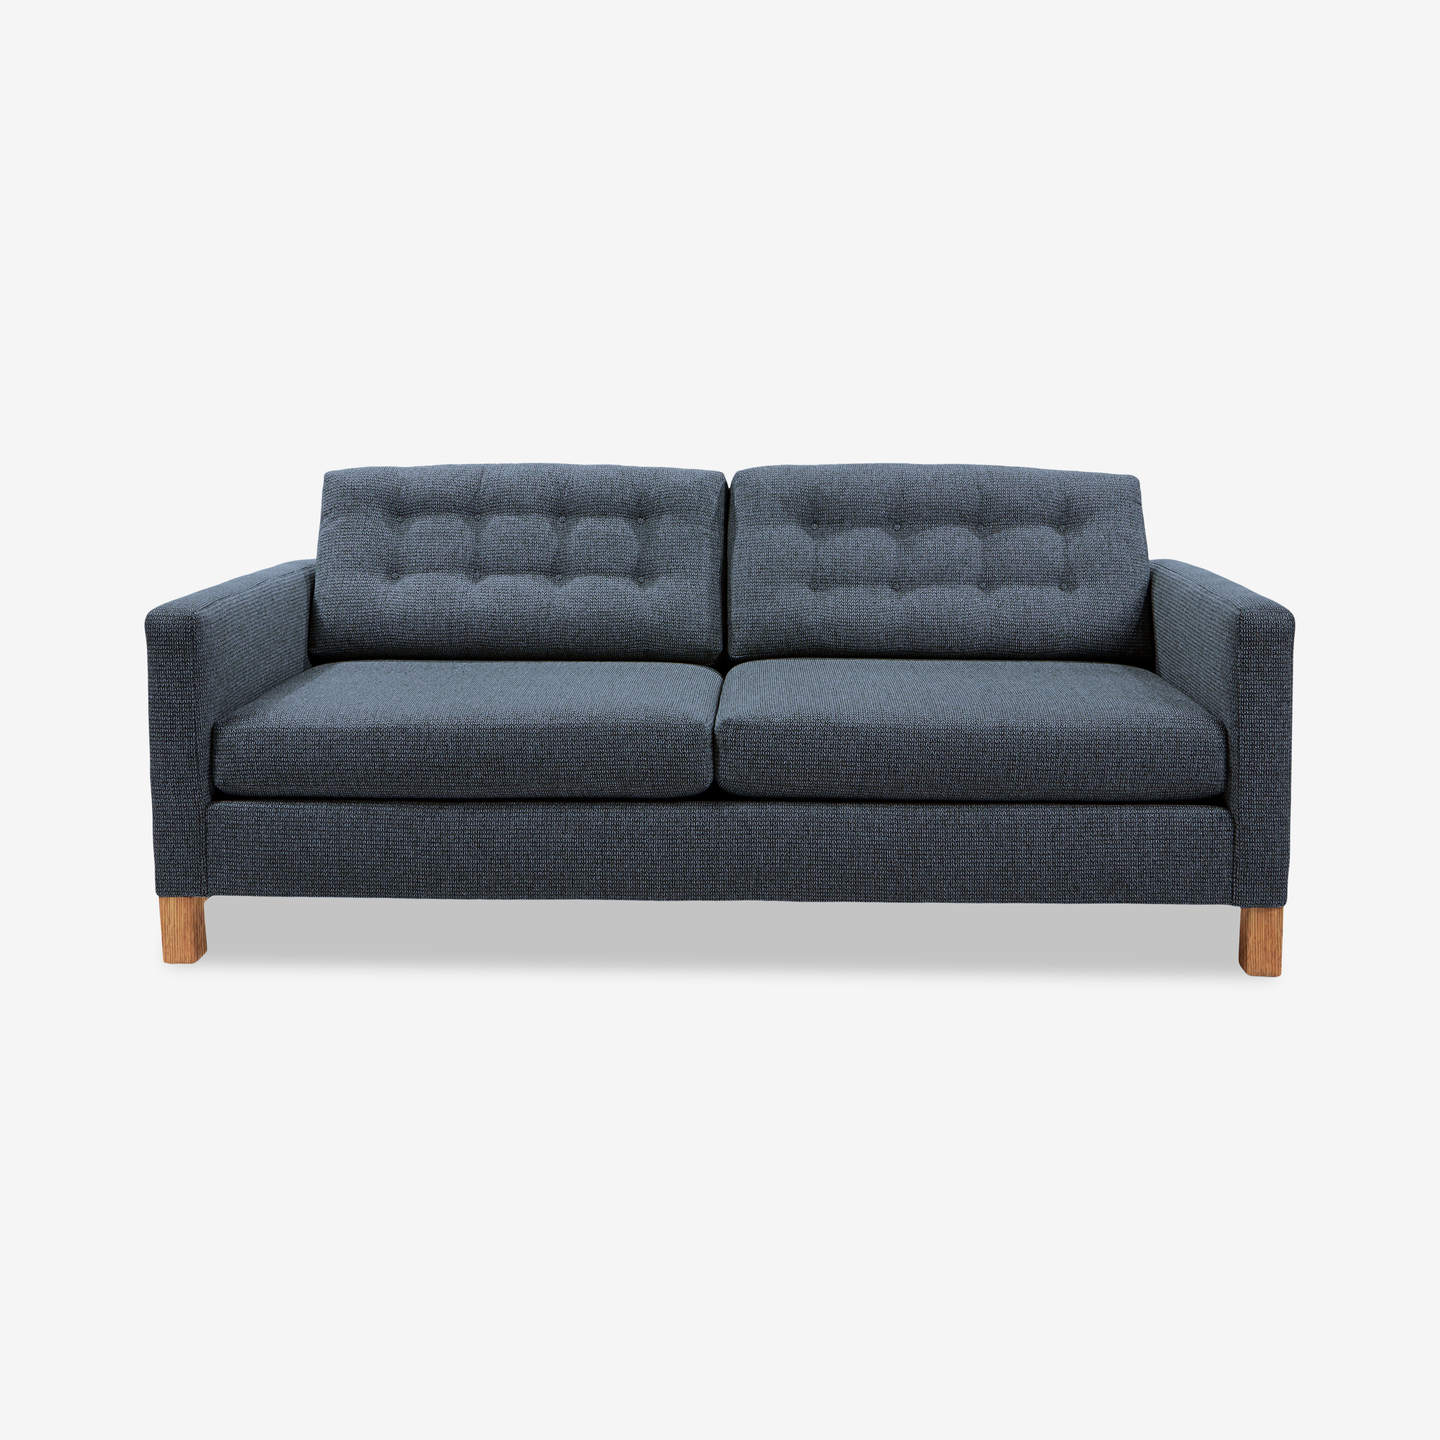 1329_Quincy-Sofa-Blue-Tufted_Front_2021